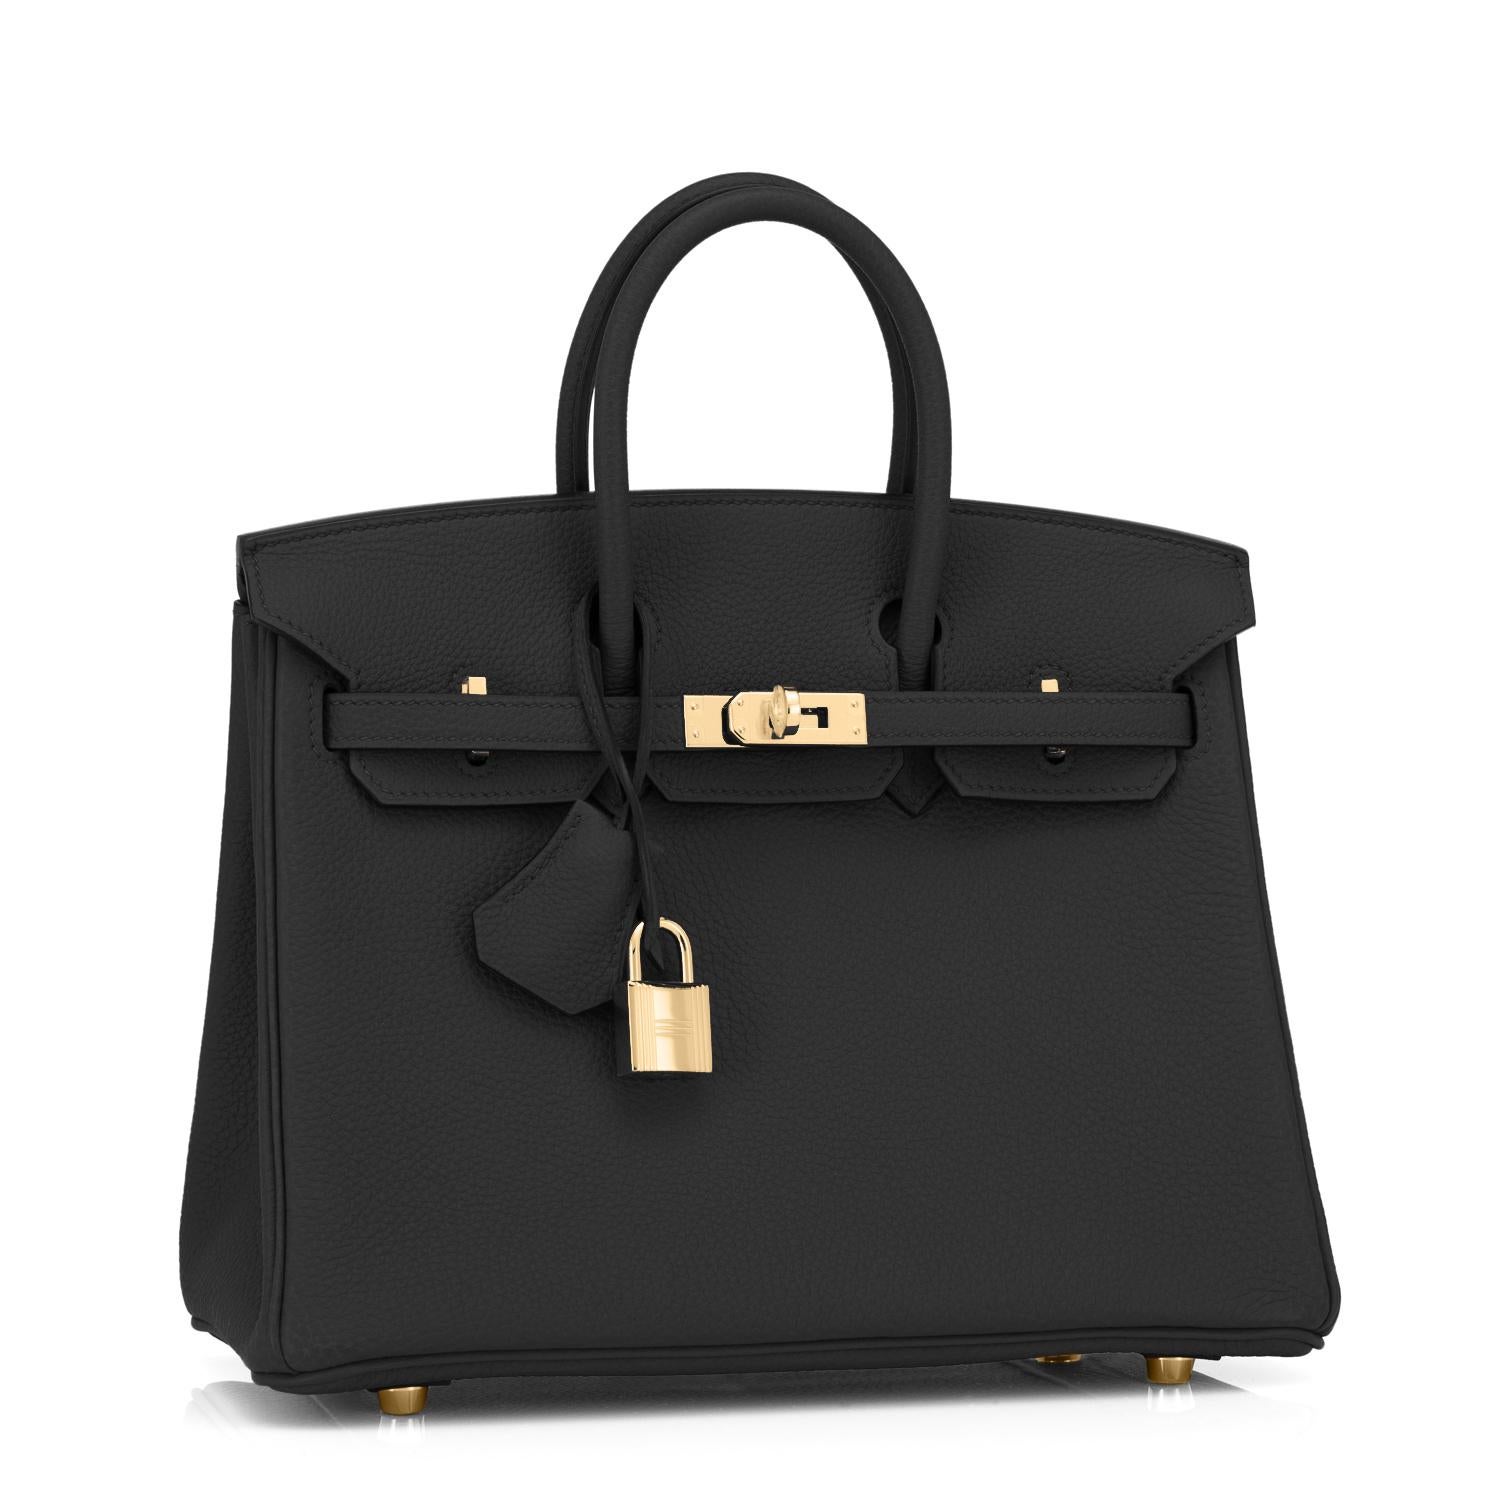 Hermes Black Baby Birkin 25cm Togo Gold Hardware Jewel
Brand New in Box. Store Fresh. Pristine Condition (with plastic on hardware) 
Perfect gift! Comes full set with keys, lock, clochette, a sleeper for the bag, rain protector, and Hermes box.
As